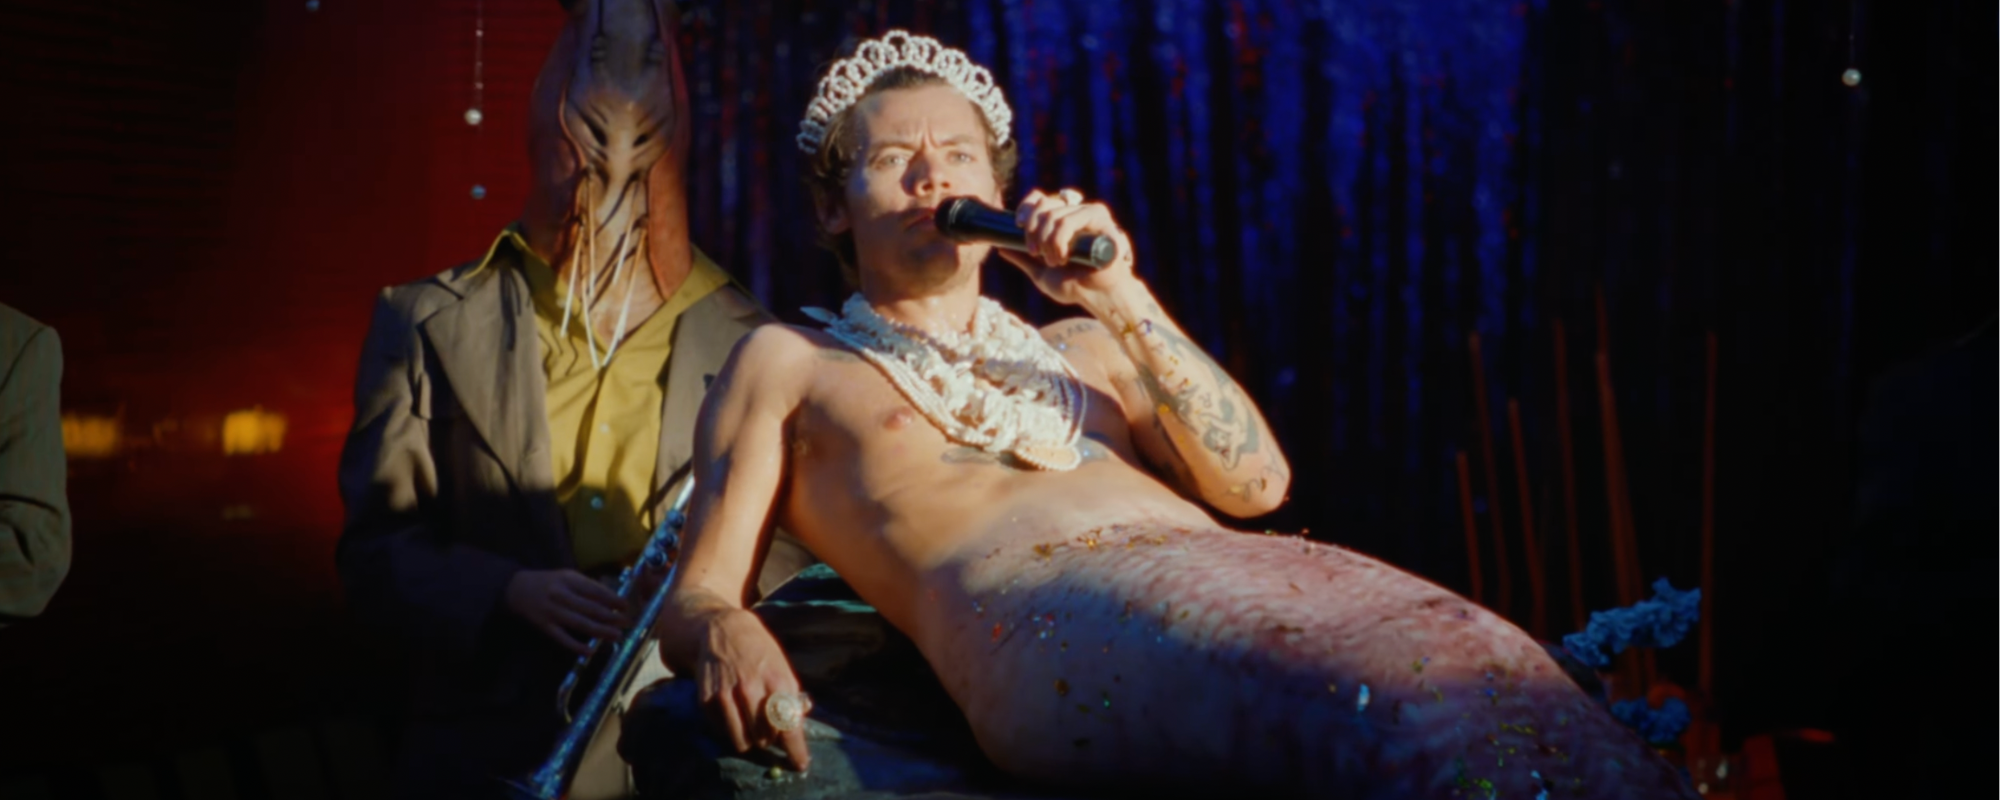 Harry Styles is an Octopus-Merman in Video for “Music For a Sushi Restaurant”